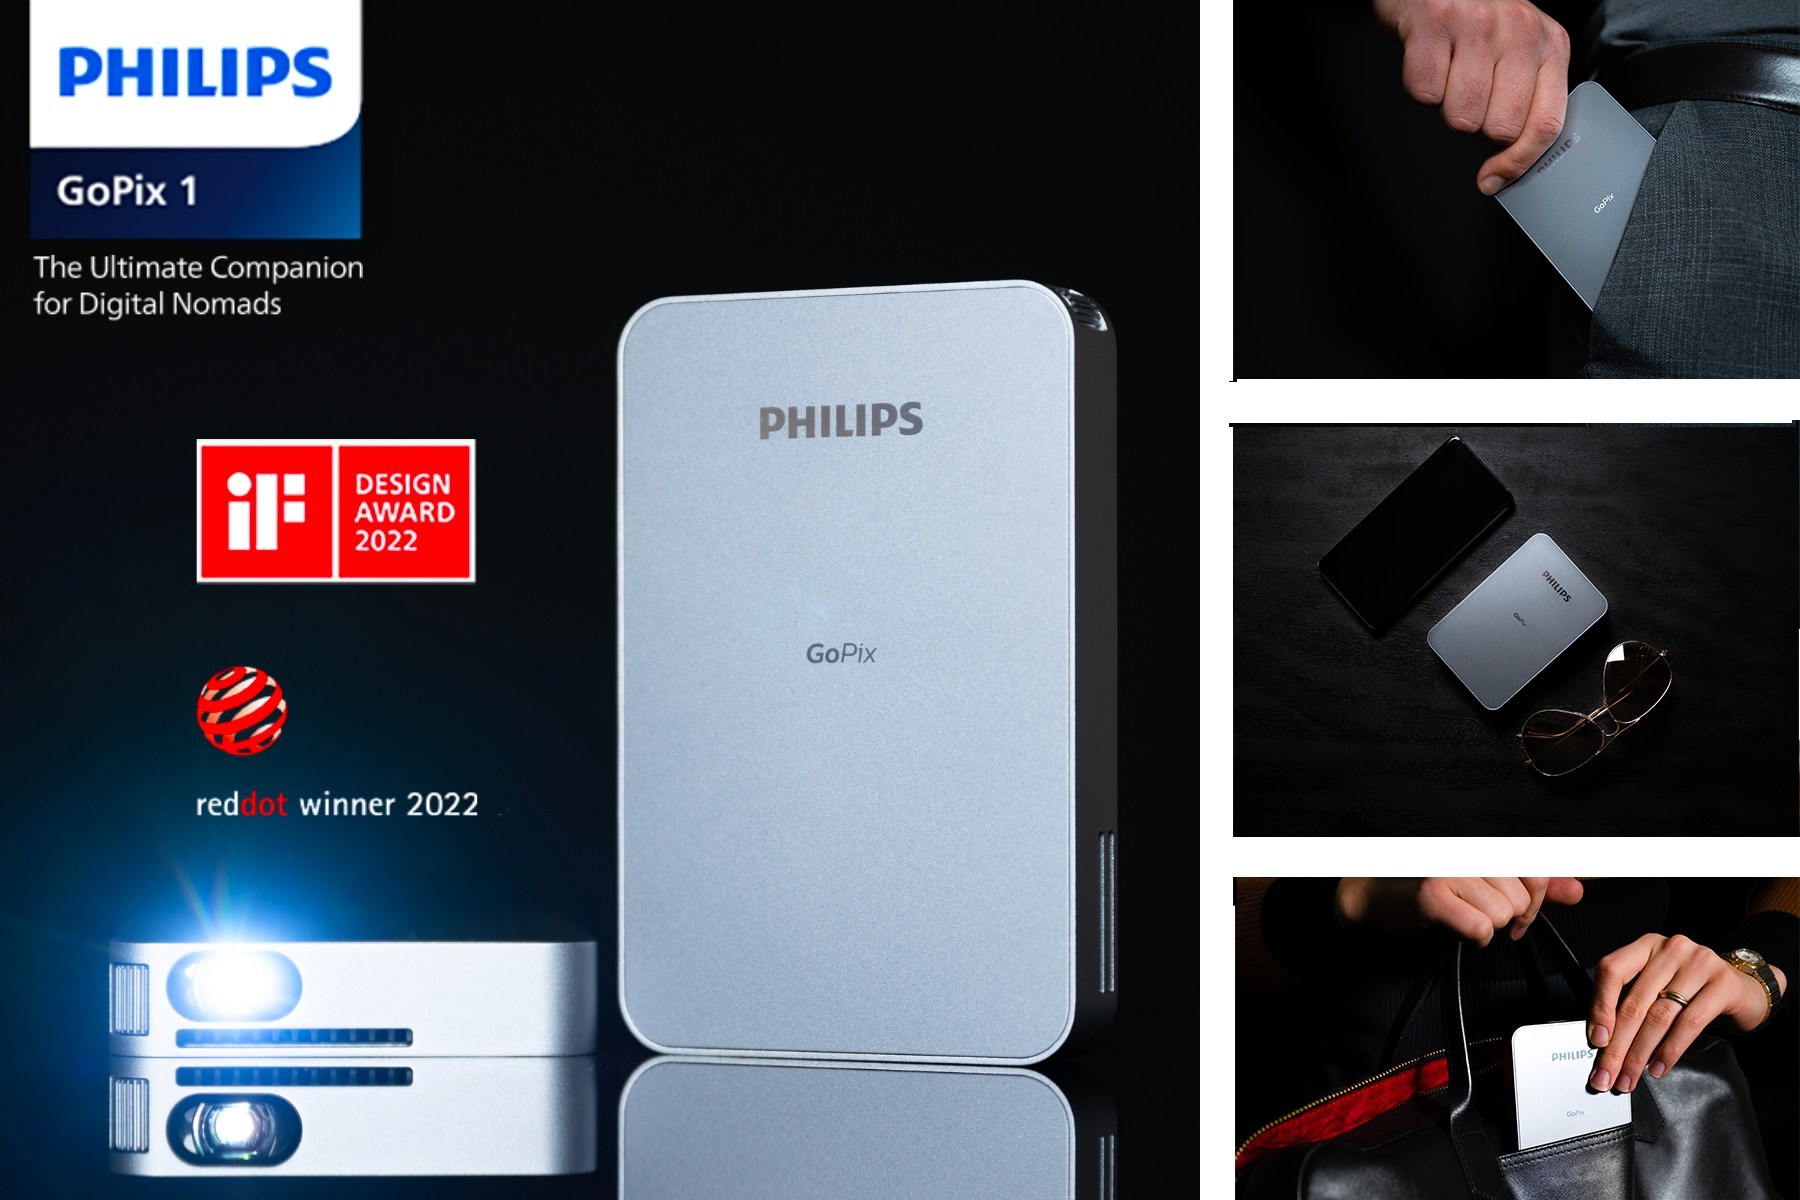 Philips GoPix 1 Presented with 2022 iF Design & Red Dot Awards